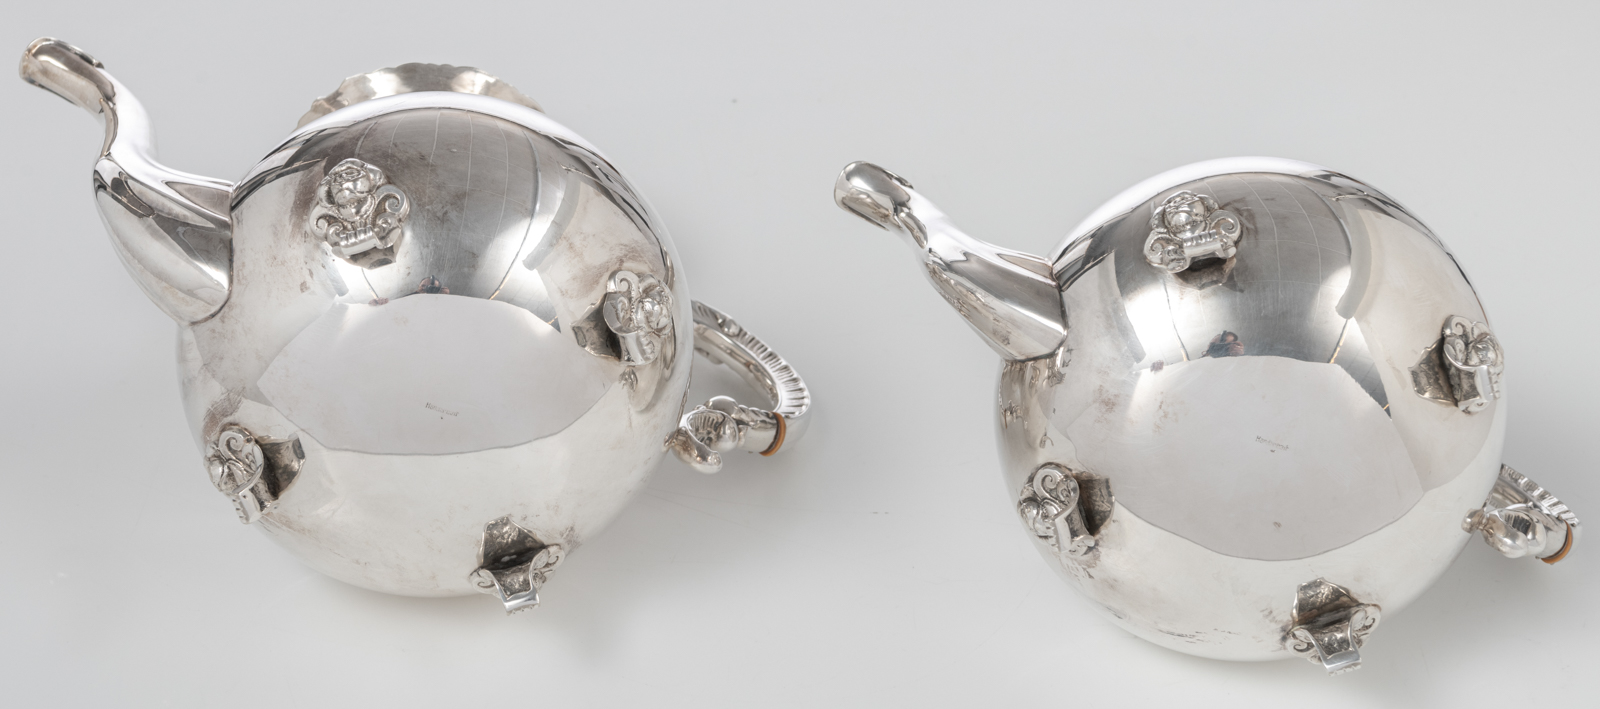 A silver plated five-piece coffee and tea set, decorated with flower-shaped knobs', probably German, - Image 23 of 27